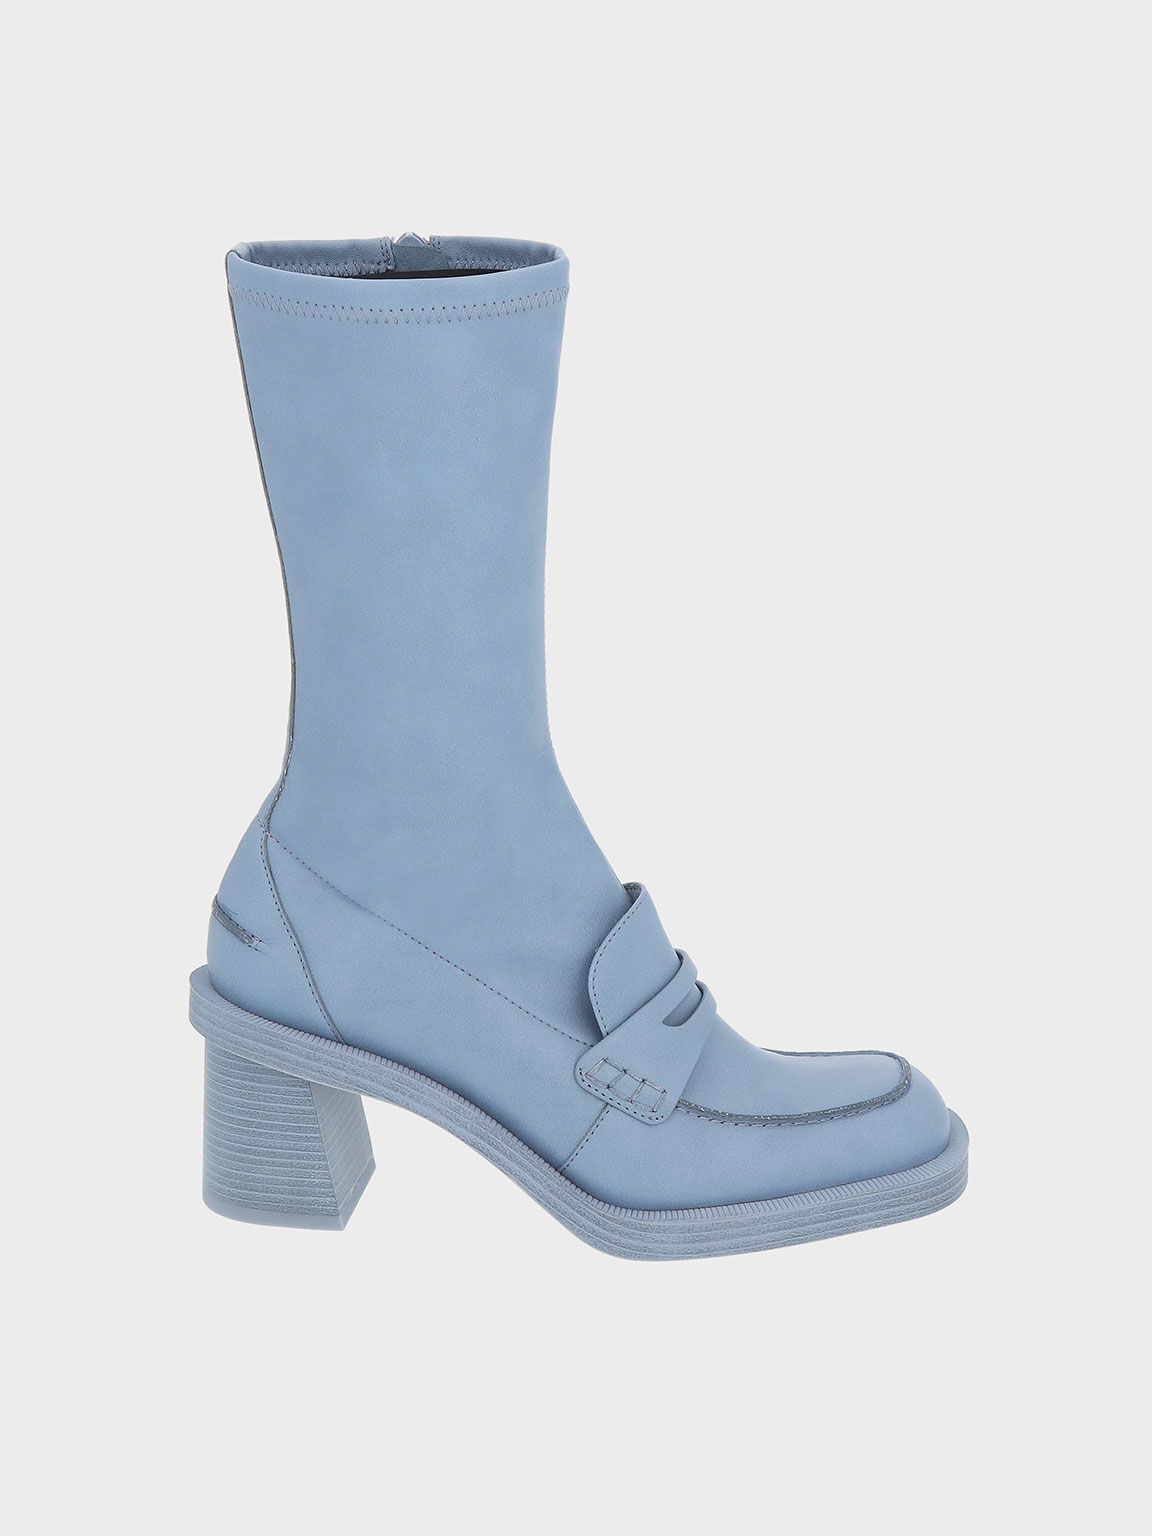 Haisley Penny Loafer Calf Boots, Blue, hi-res